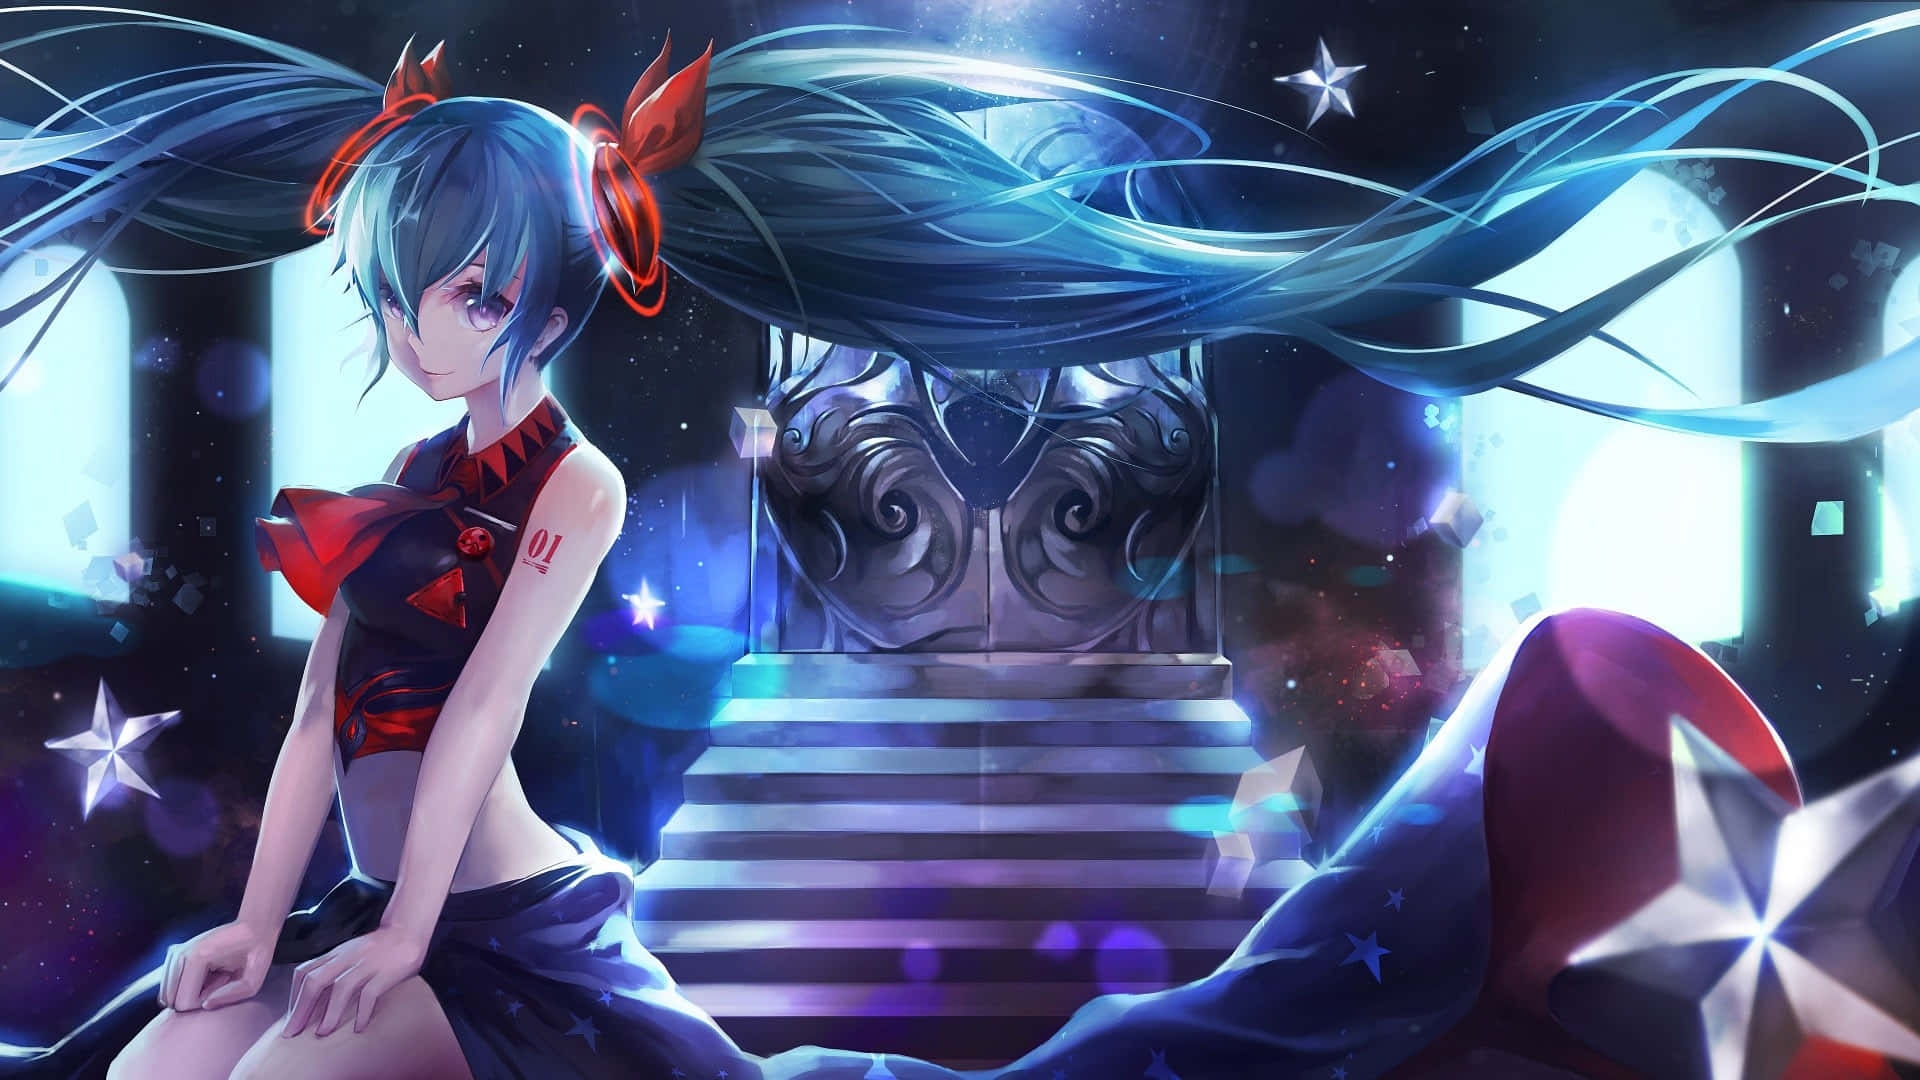 Wearing her signature blue twin tails, Miku Hatsune's confidence and grace mesmerise on this starry night.